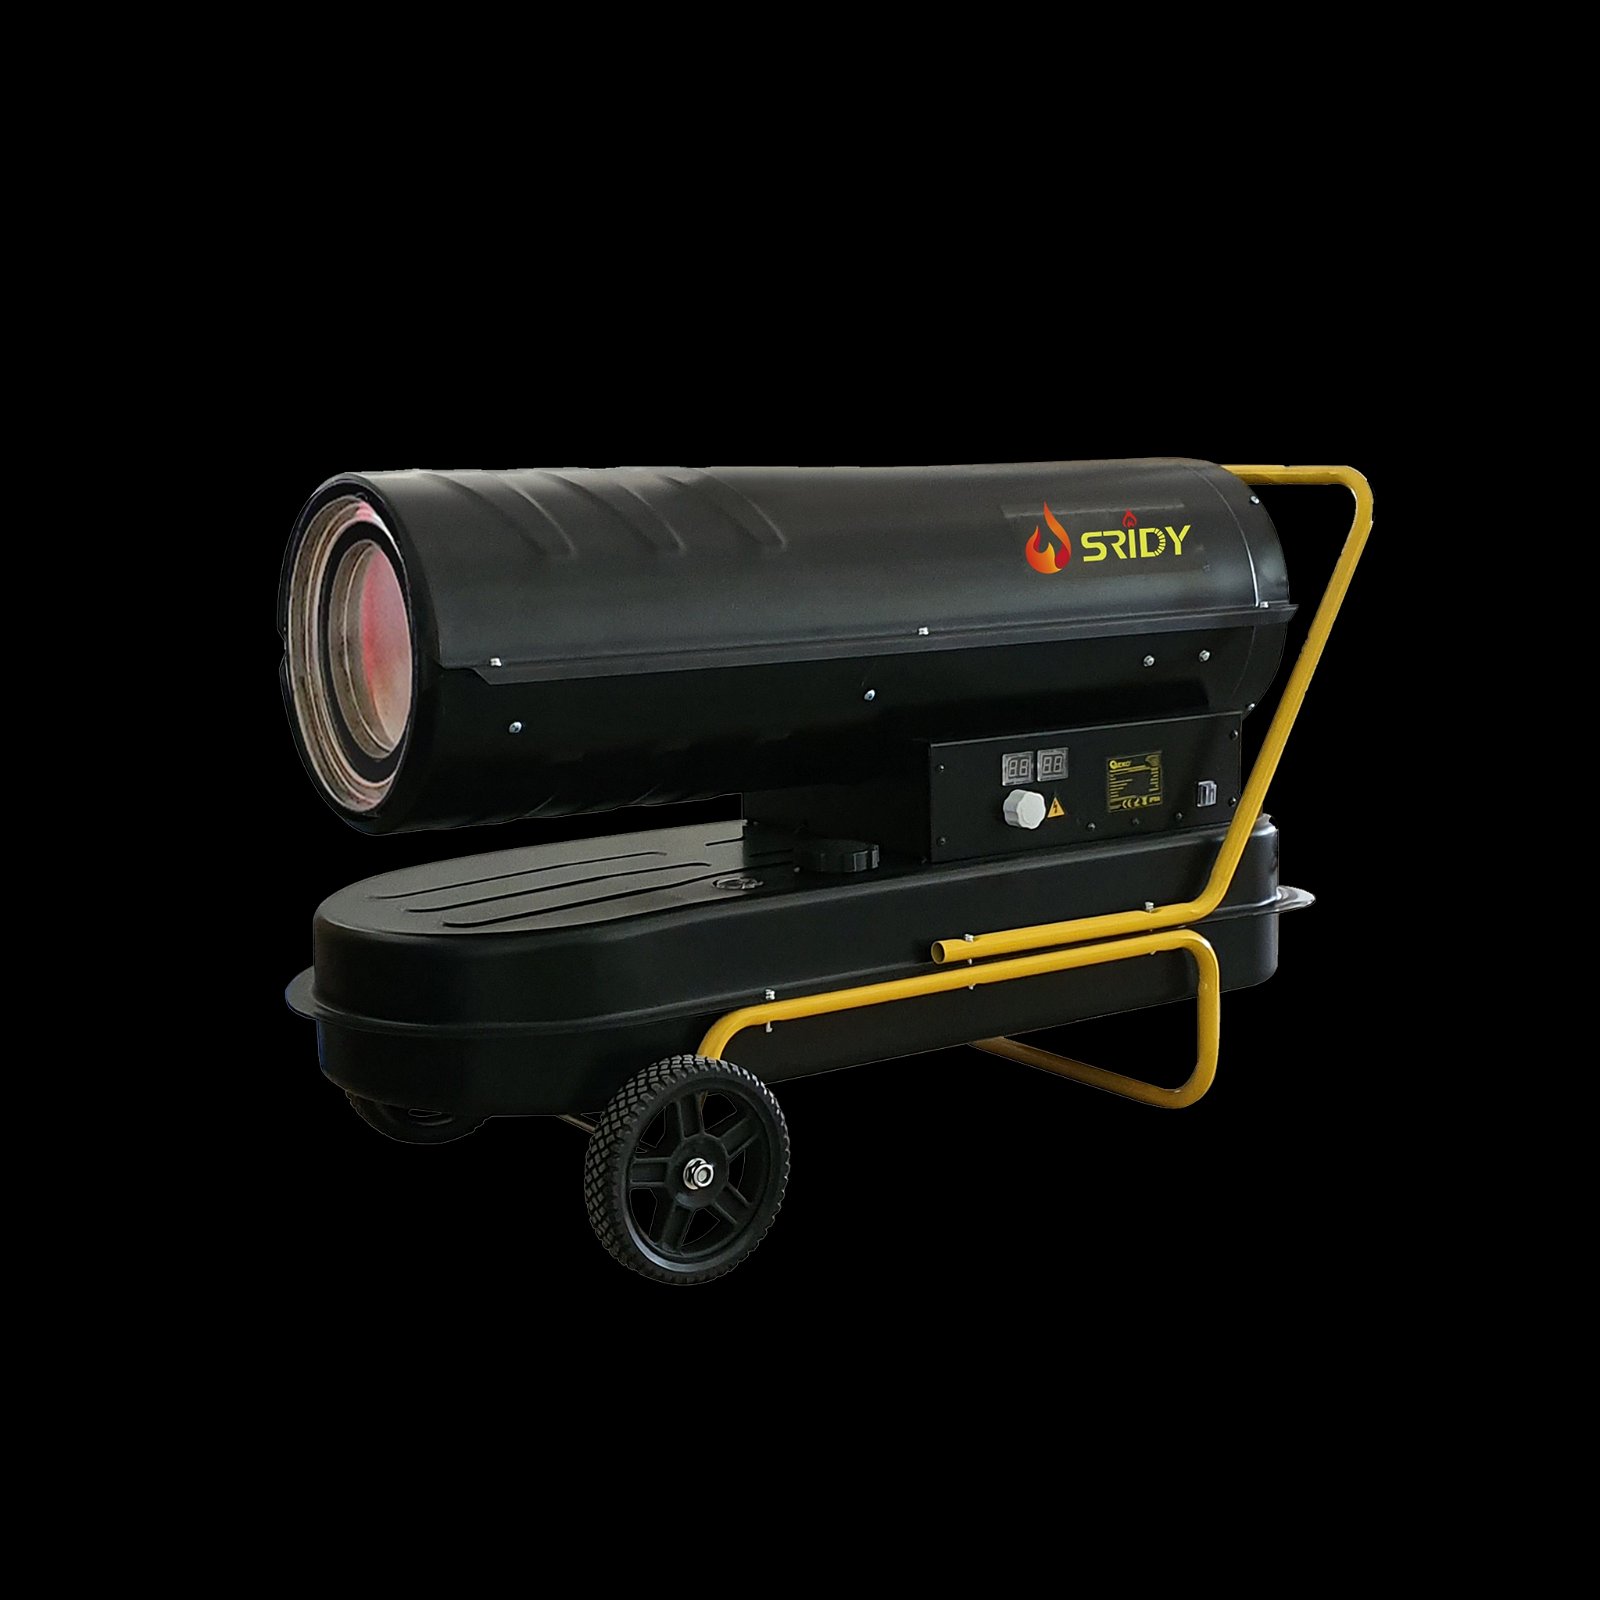 50KW Portable Diesel heater with adjustable thermostat